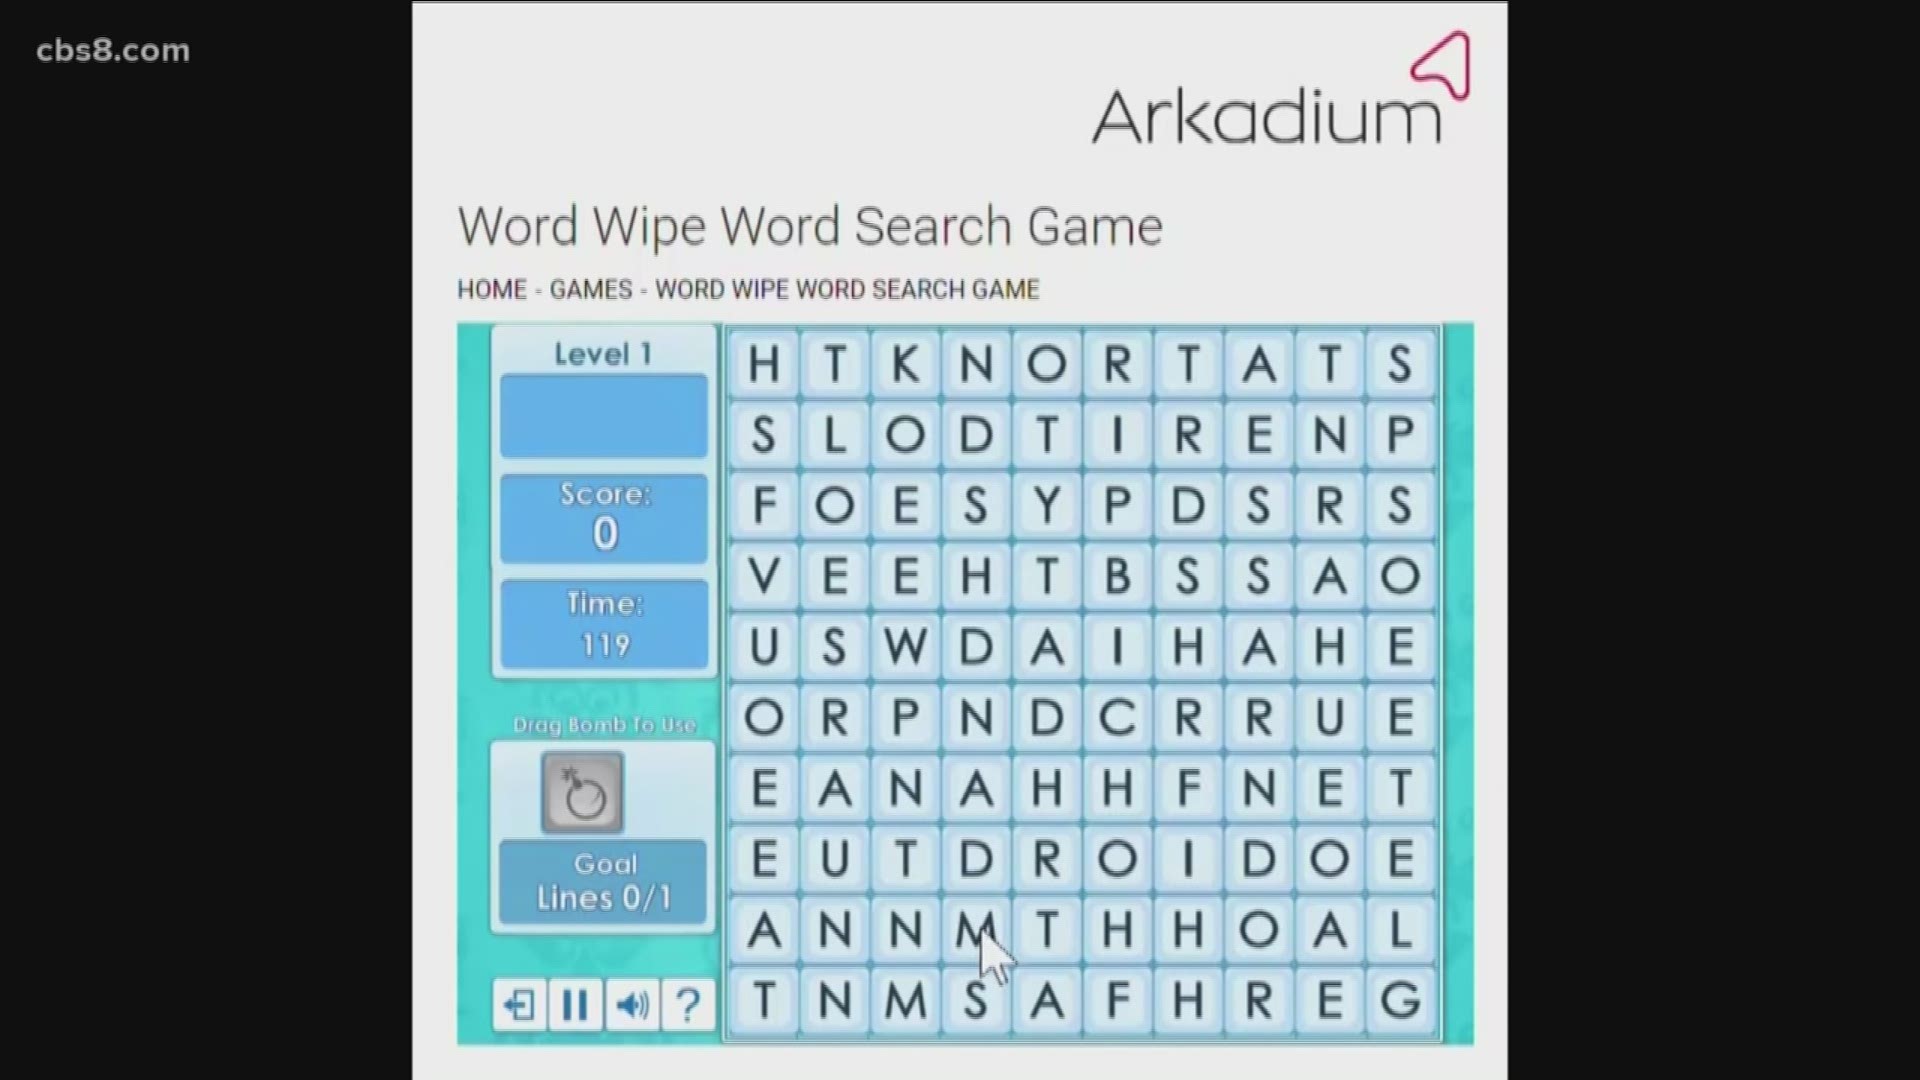 Tom Rassweiler from Arkadium joined Morning Extra to talk about different games they offer that can keep you and your mind busy.